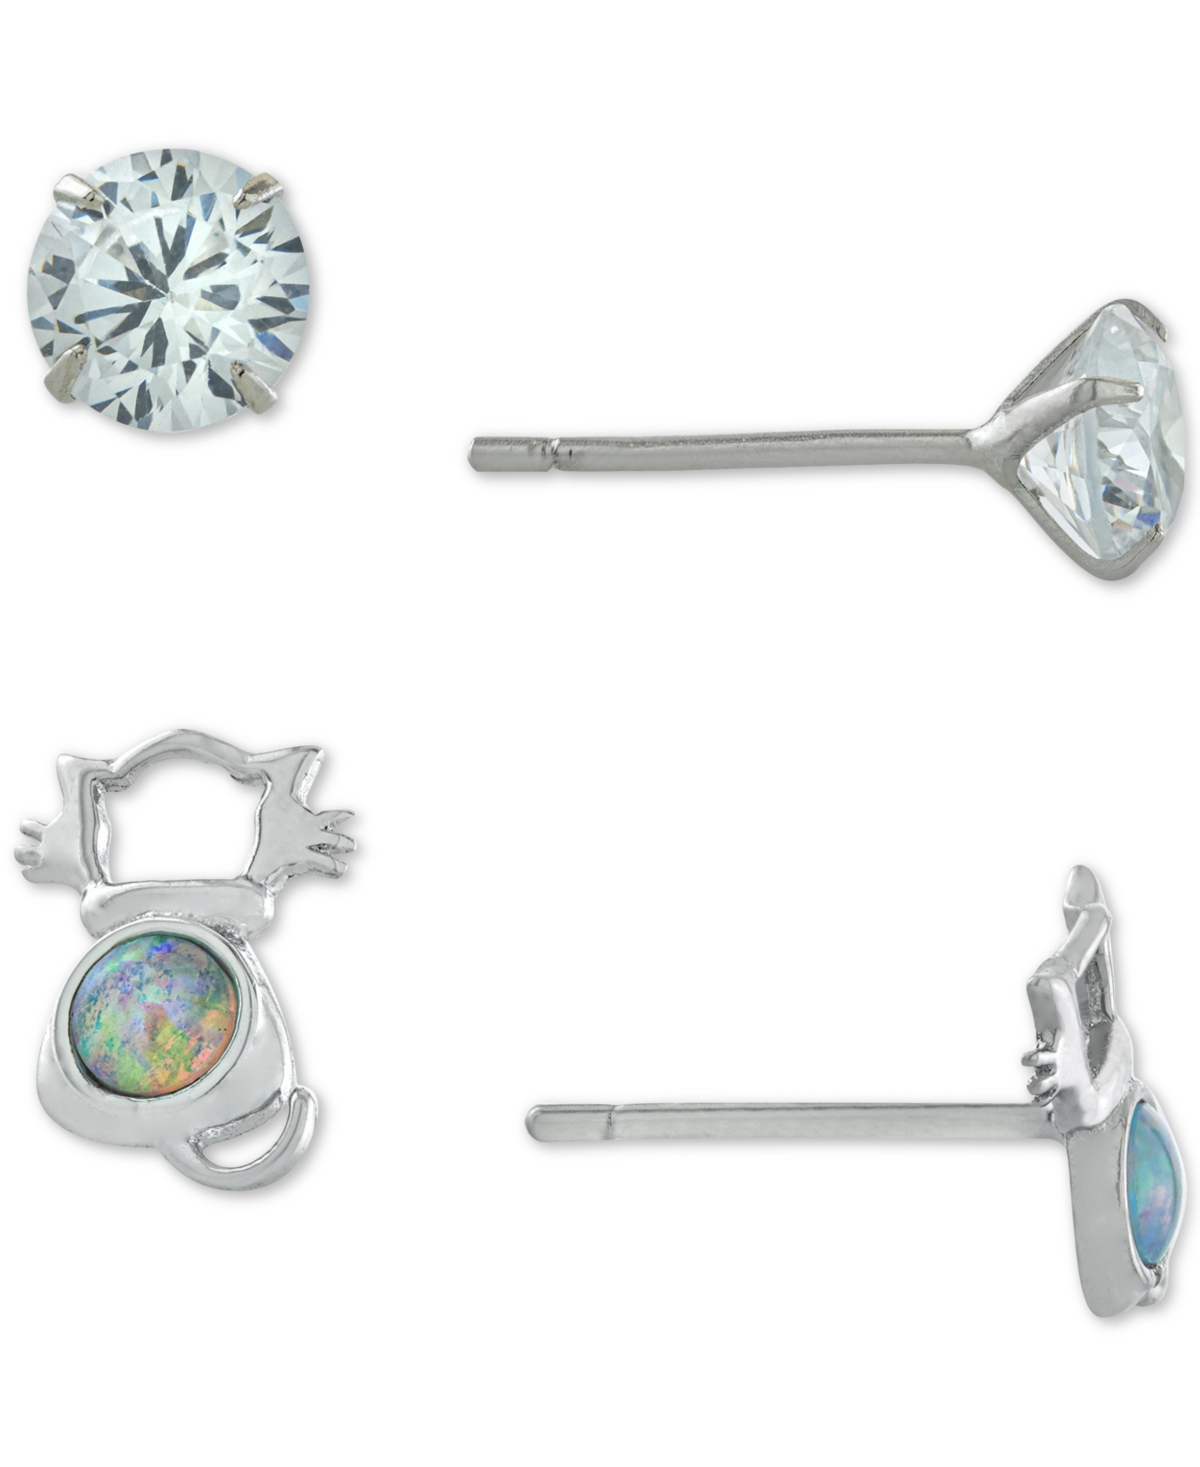 2-Pc. Set Cubic Zirconia & Simulated Opal Cat Stud Earrings in Sterling Silver, Created for Macy's - Sterling Silver